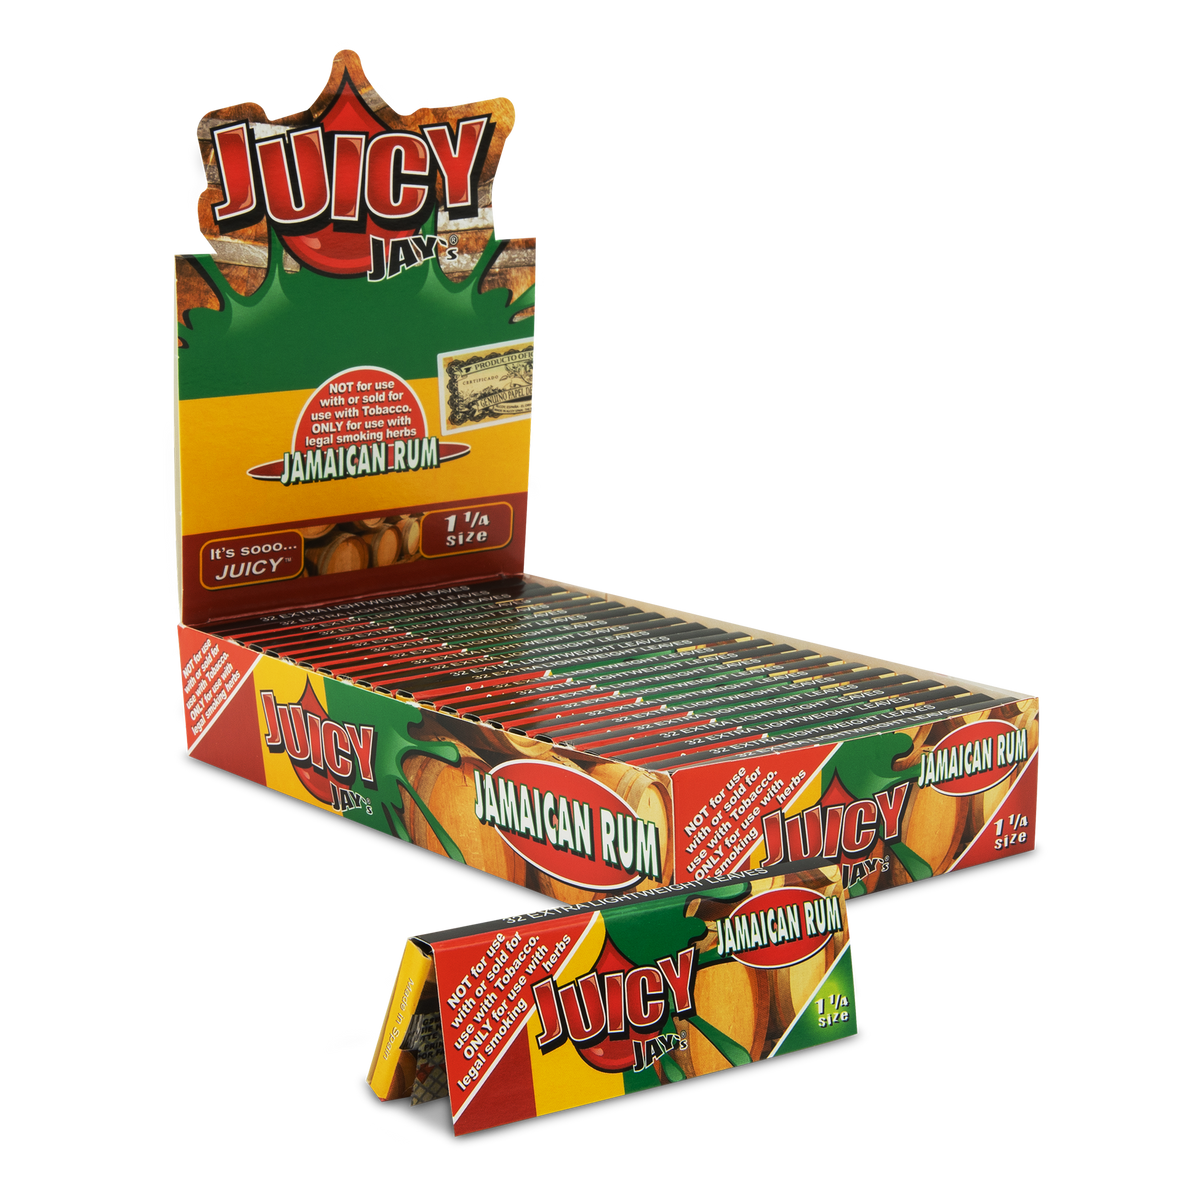 Juicy Jays 1 1/4 Jamaican Rum Flavored Hemp Rolling Papers Rolling Papers JAY10024 esd-official